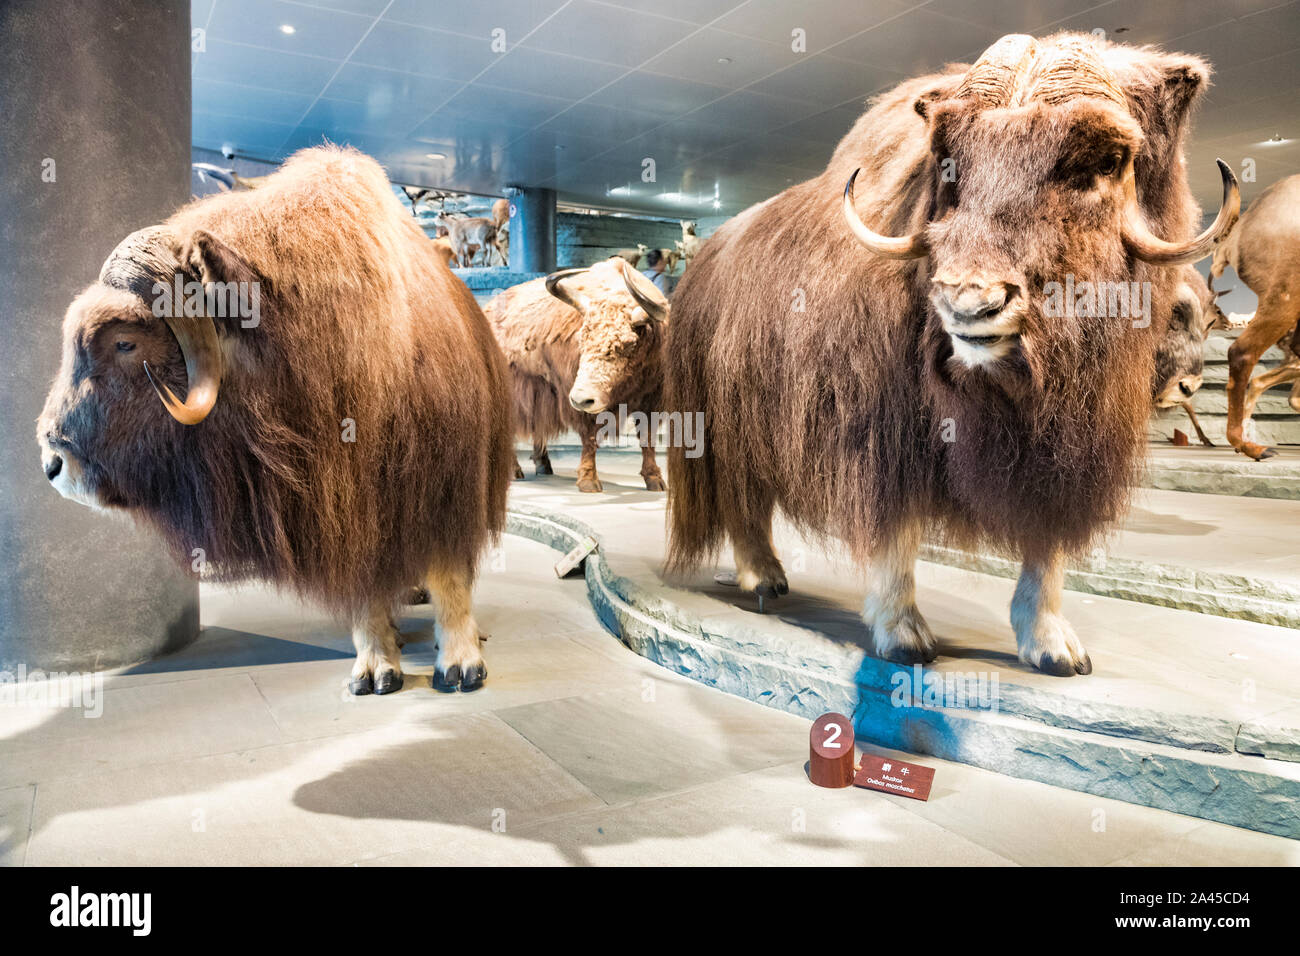 30 Novembre 2018: Shanghai in Cina - Musk ox (Ovibos moschatus) sul display nel museo. Foto Stock